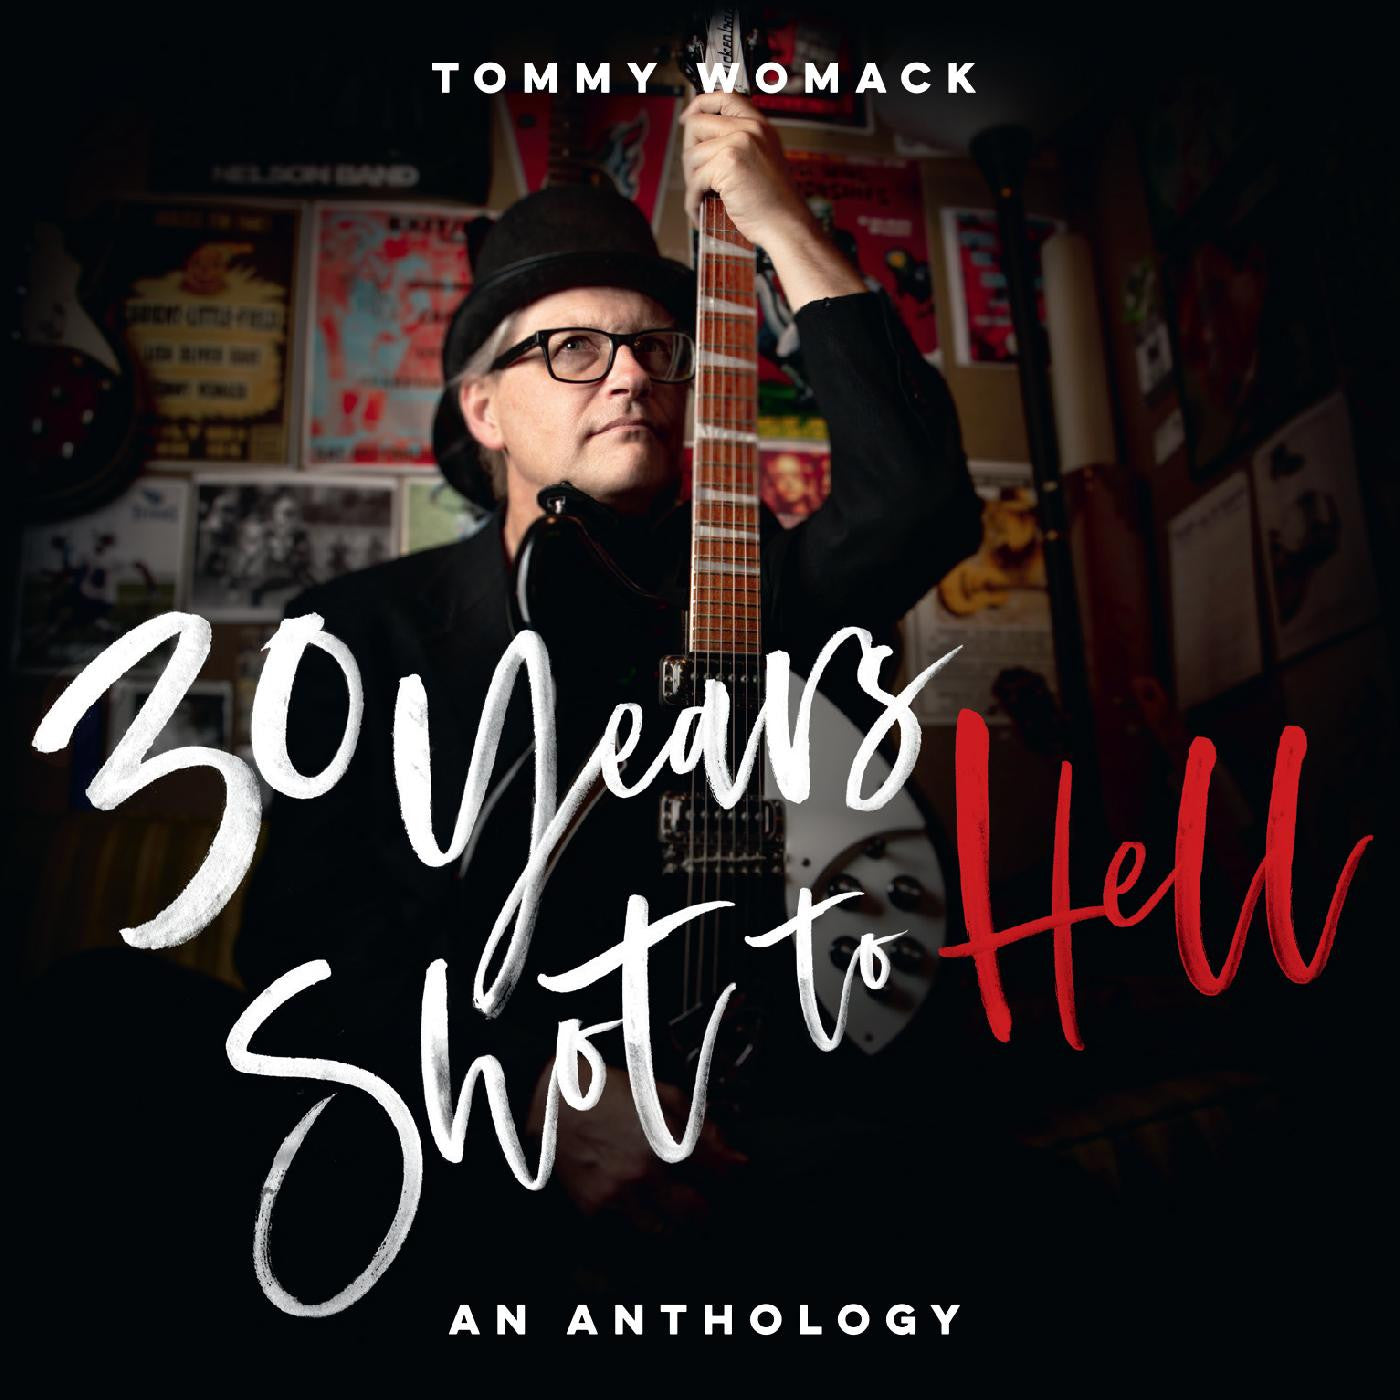 TOMMY WOMACK '30 YEARS SHOT TO HELL: A TOMMY WOMACK ANTHOLOGY' 2LP